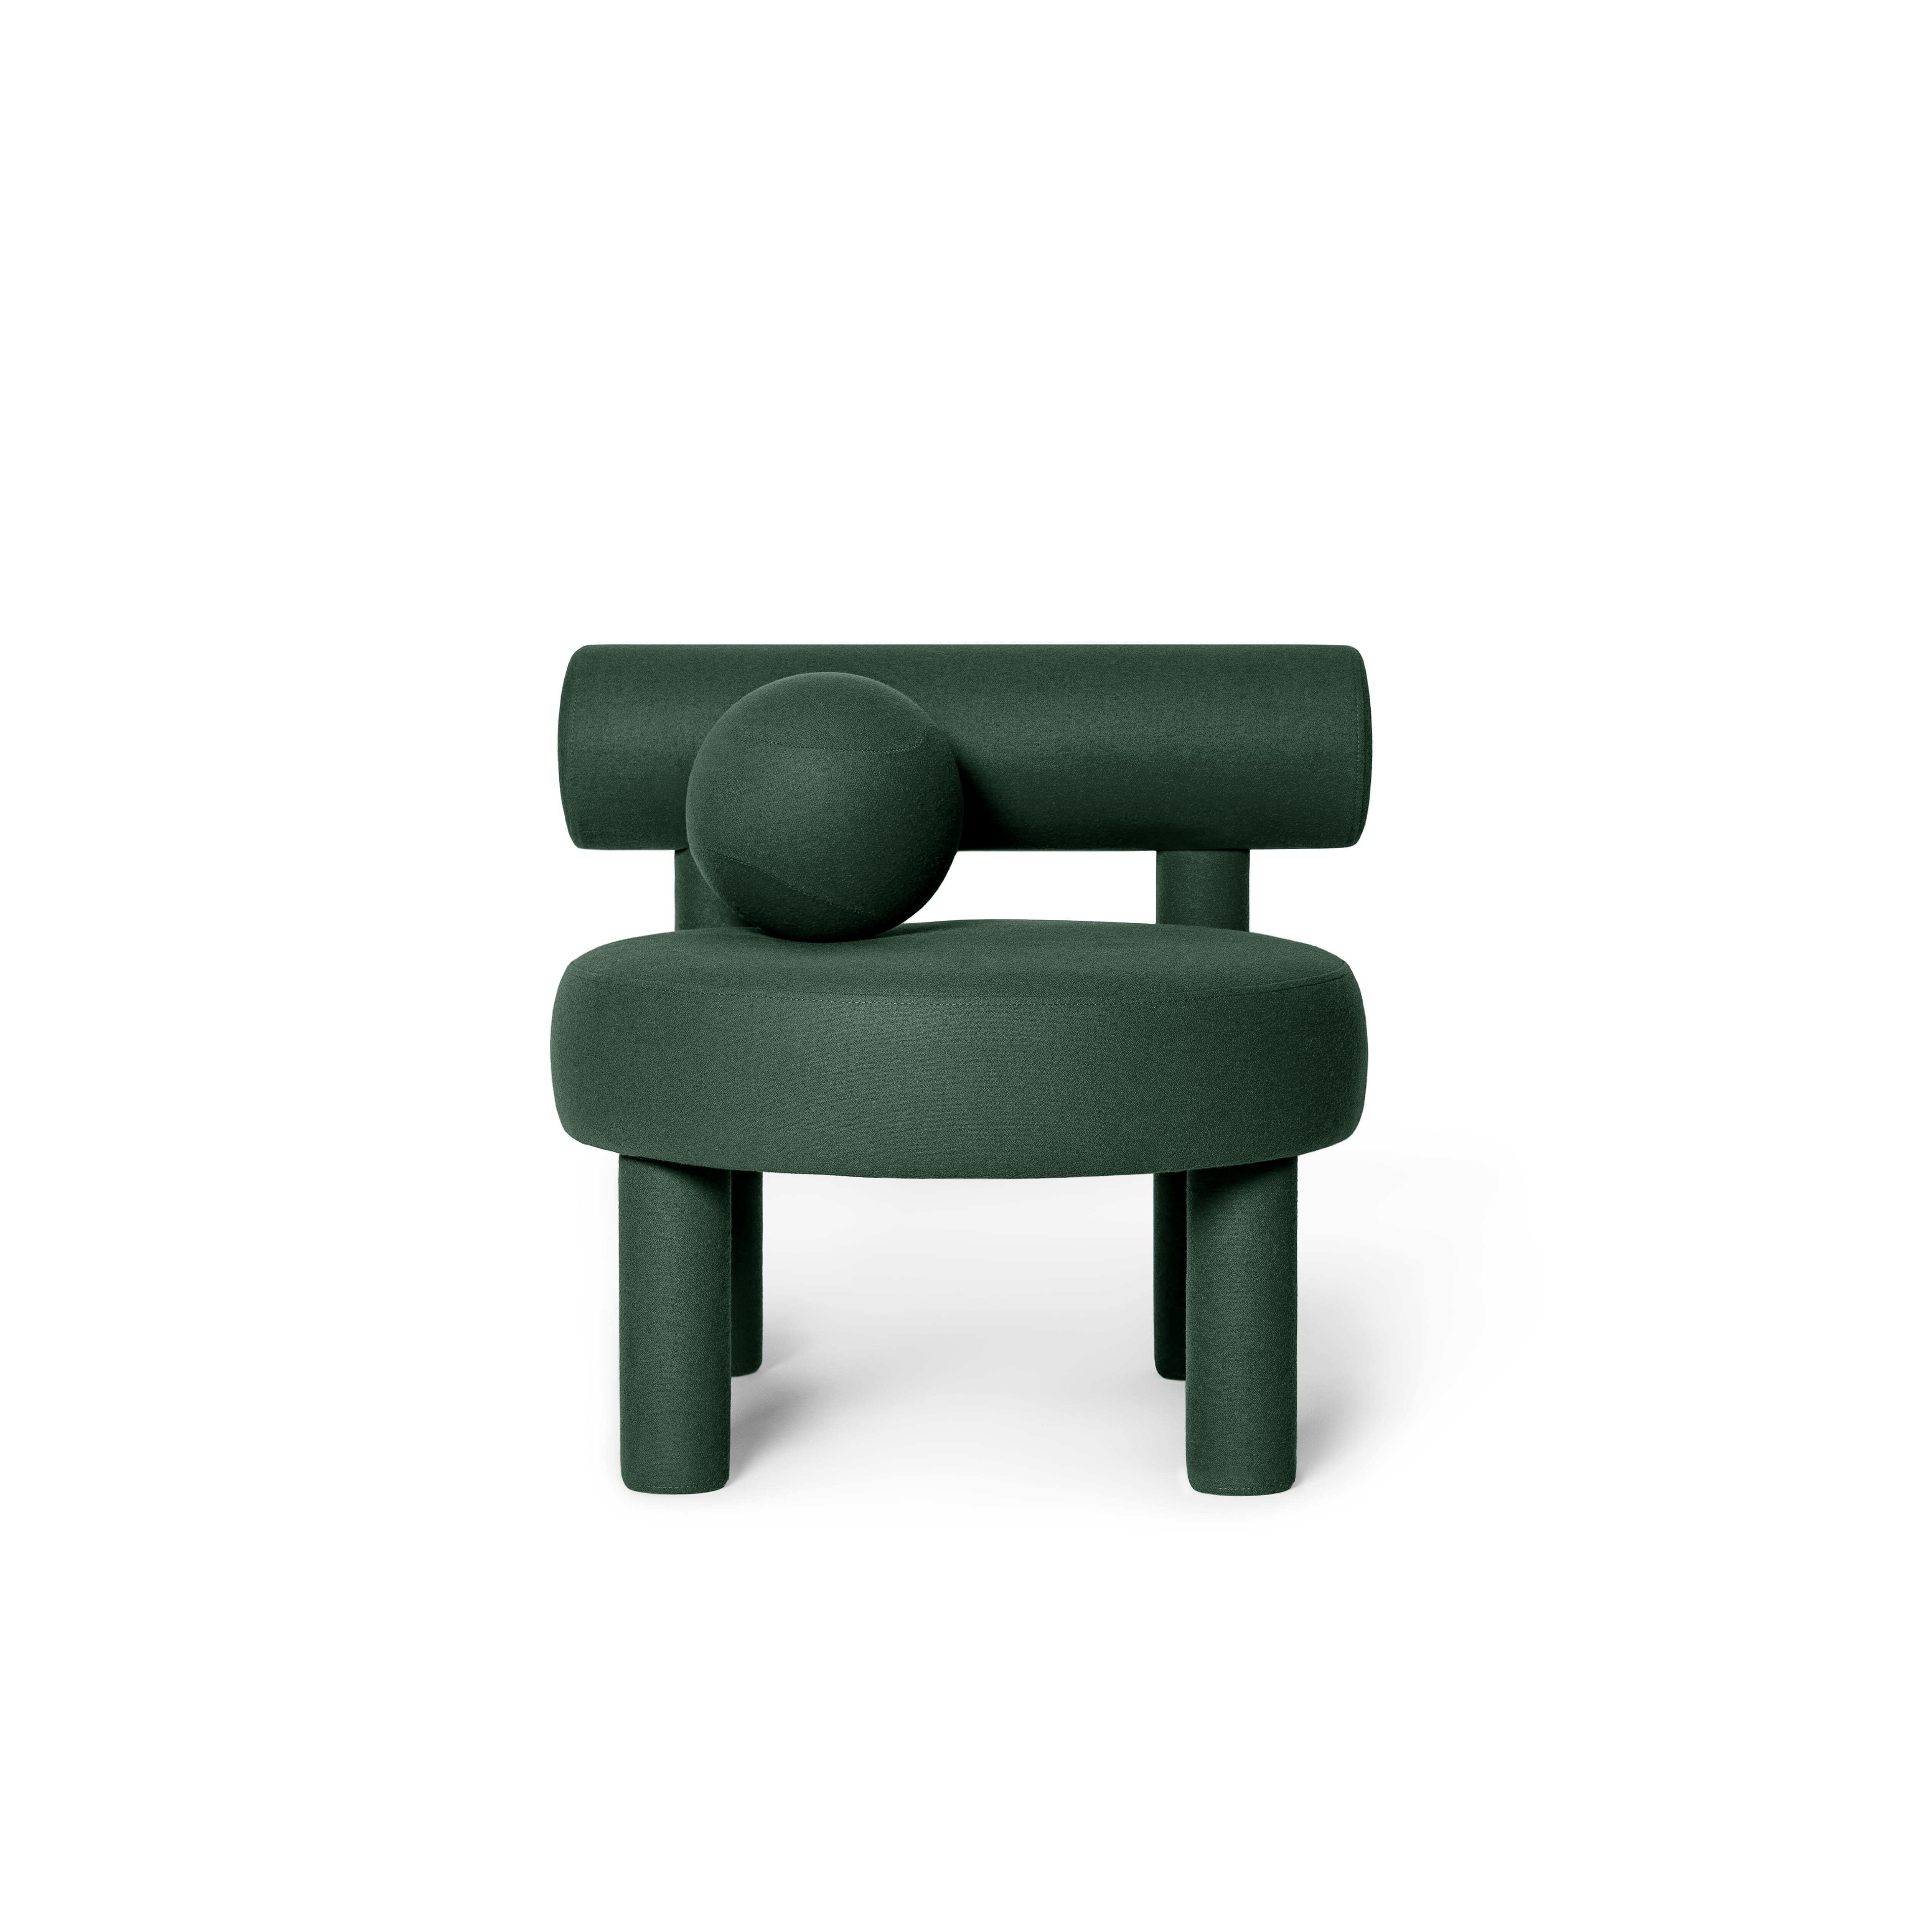 Low chair GROPIUS CS1 by Noom
Model : Category Savoy FR - Garden 509
Designer: Kateryna Sokolova

Dimensions:
Height: 71 cm / 27,95 in
Width: 75 cm / 29,53 in
Depth: 75 cm / 29,53 in
Seat height: 44 cm / 17,32 in

New NOOM furniture collection is